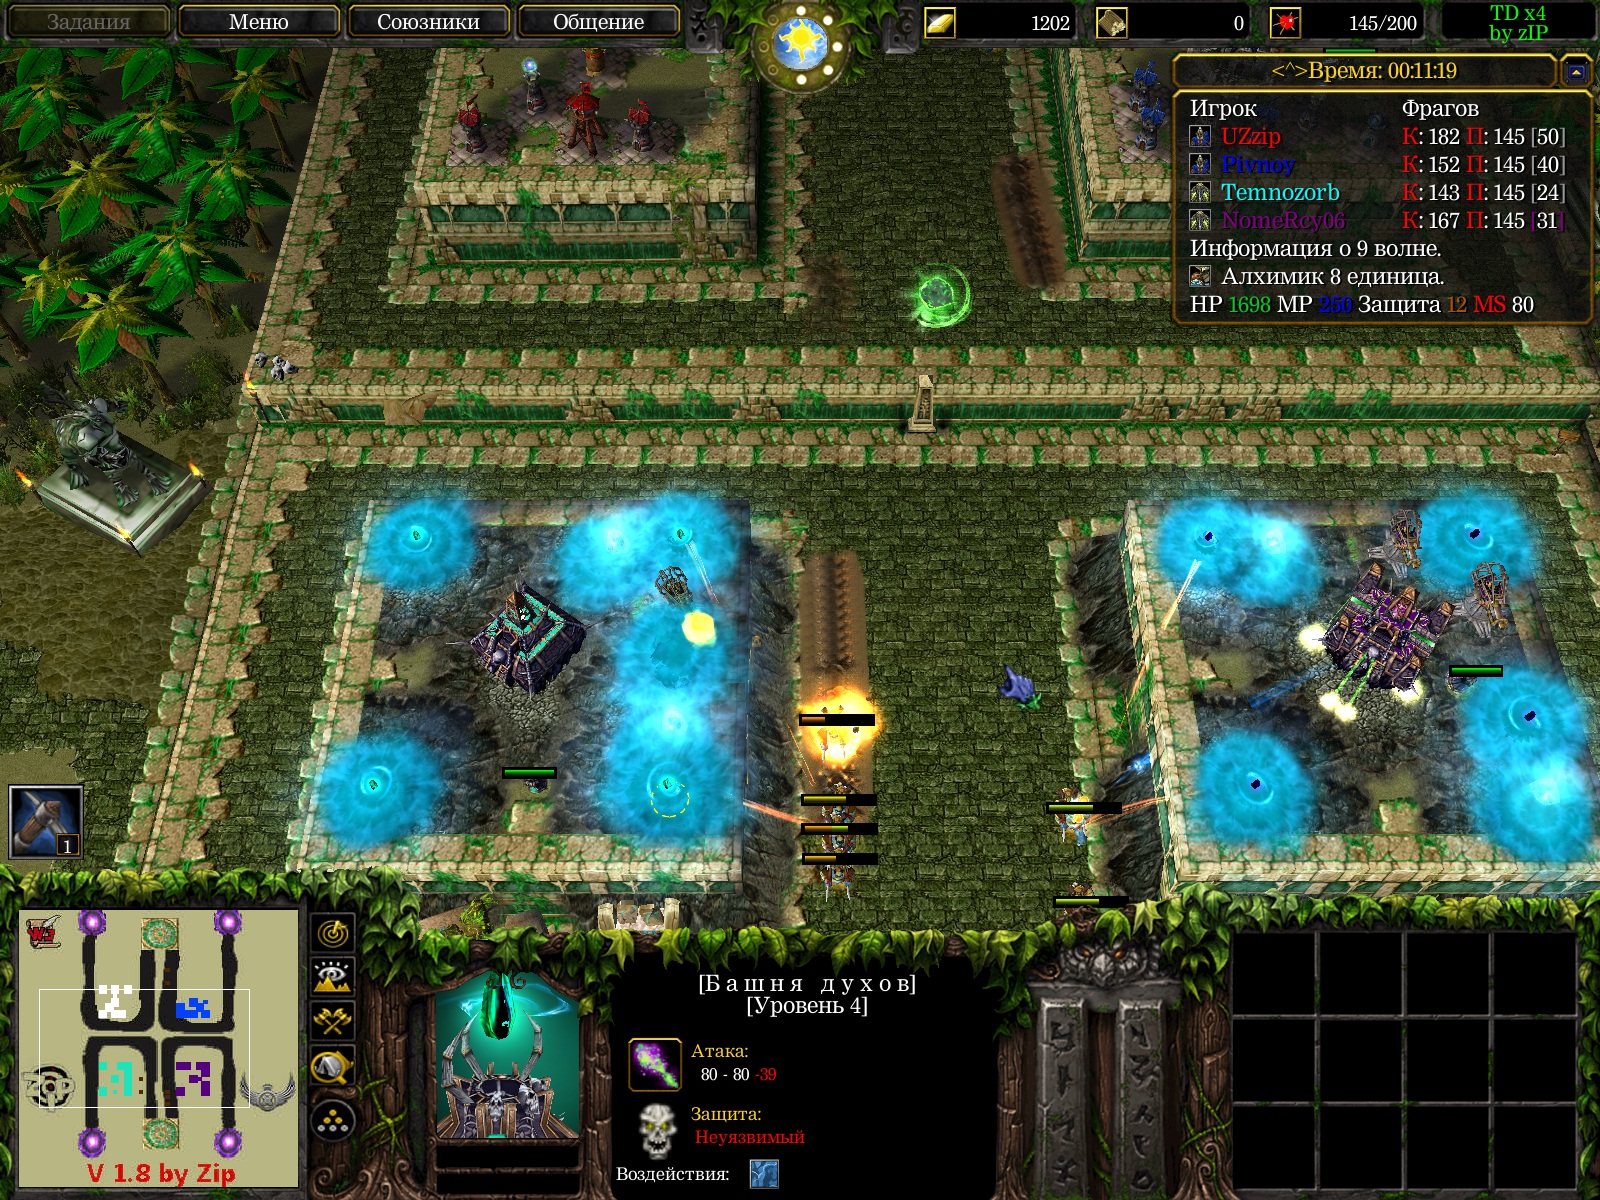 Furry tower defense. Warcraft 3 Tower Defense башни. Stronghold td Warcraft 3. Варкрафт 3 игра. Tower Defense x.